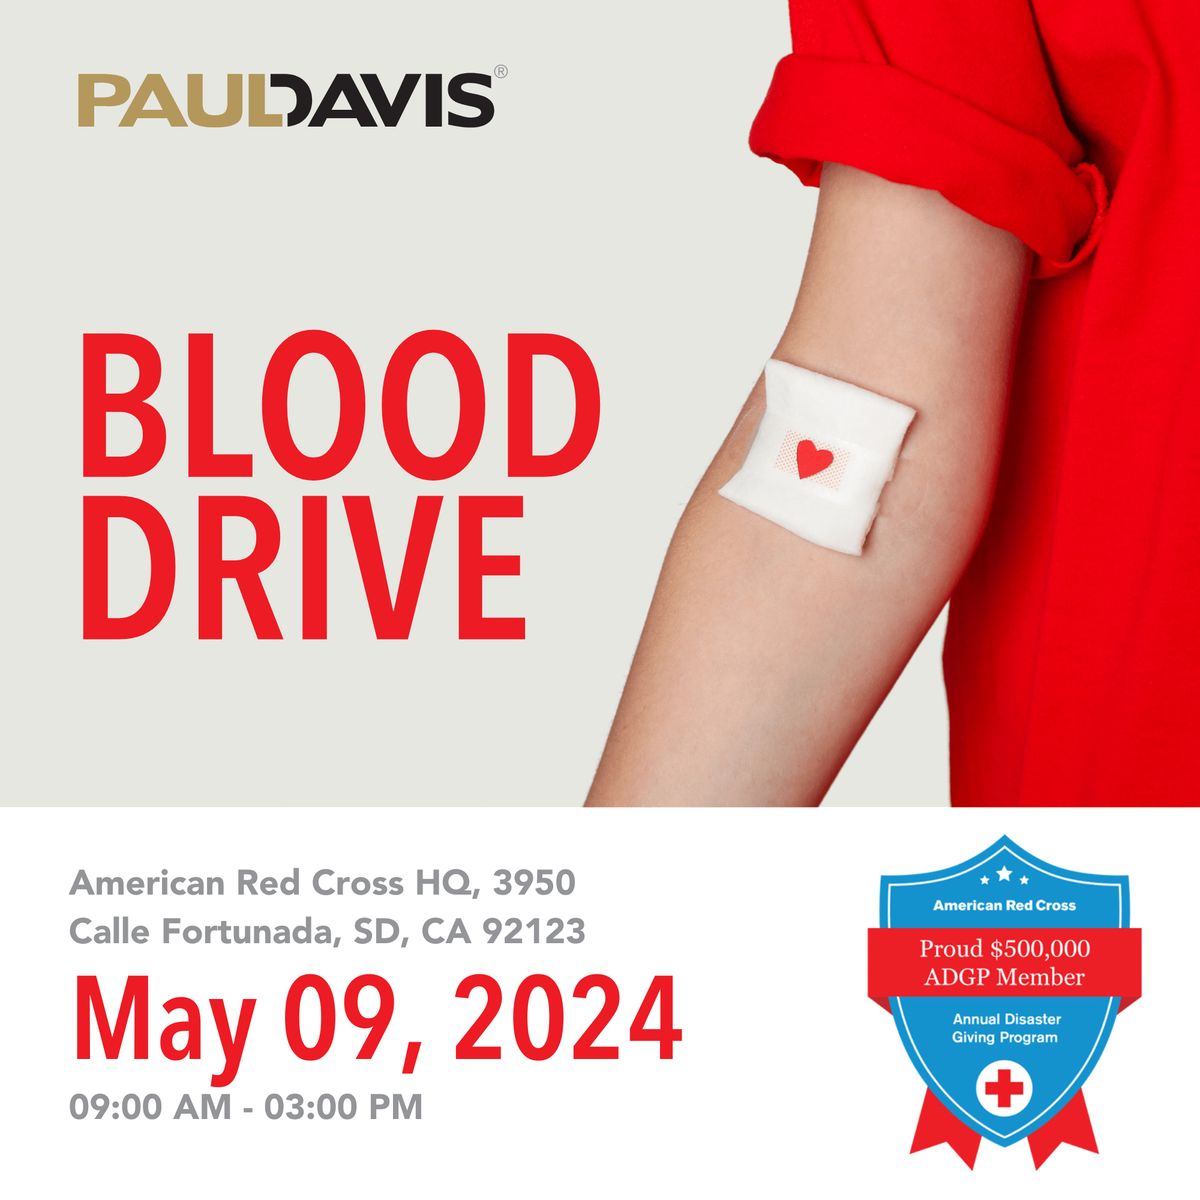 Be a difference maker and donate blood to save lives. 